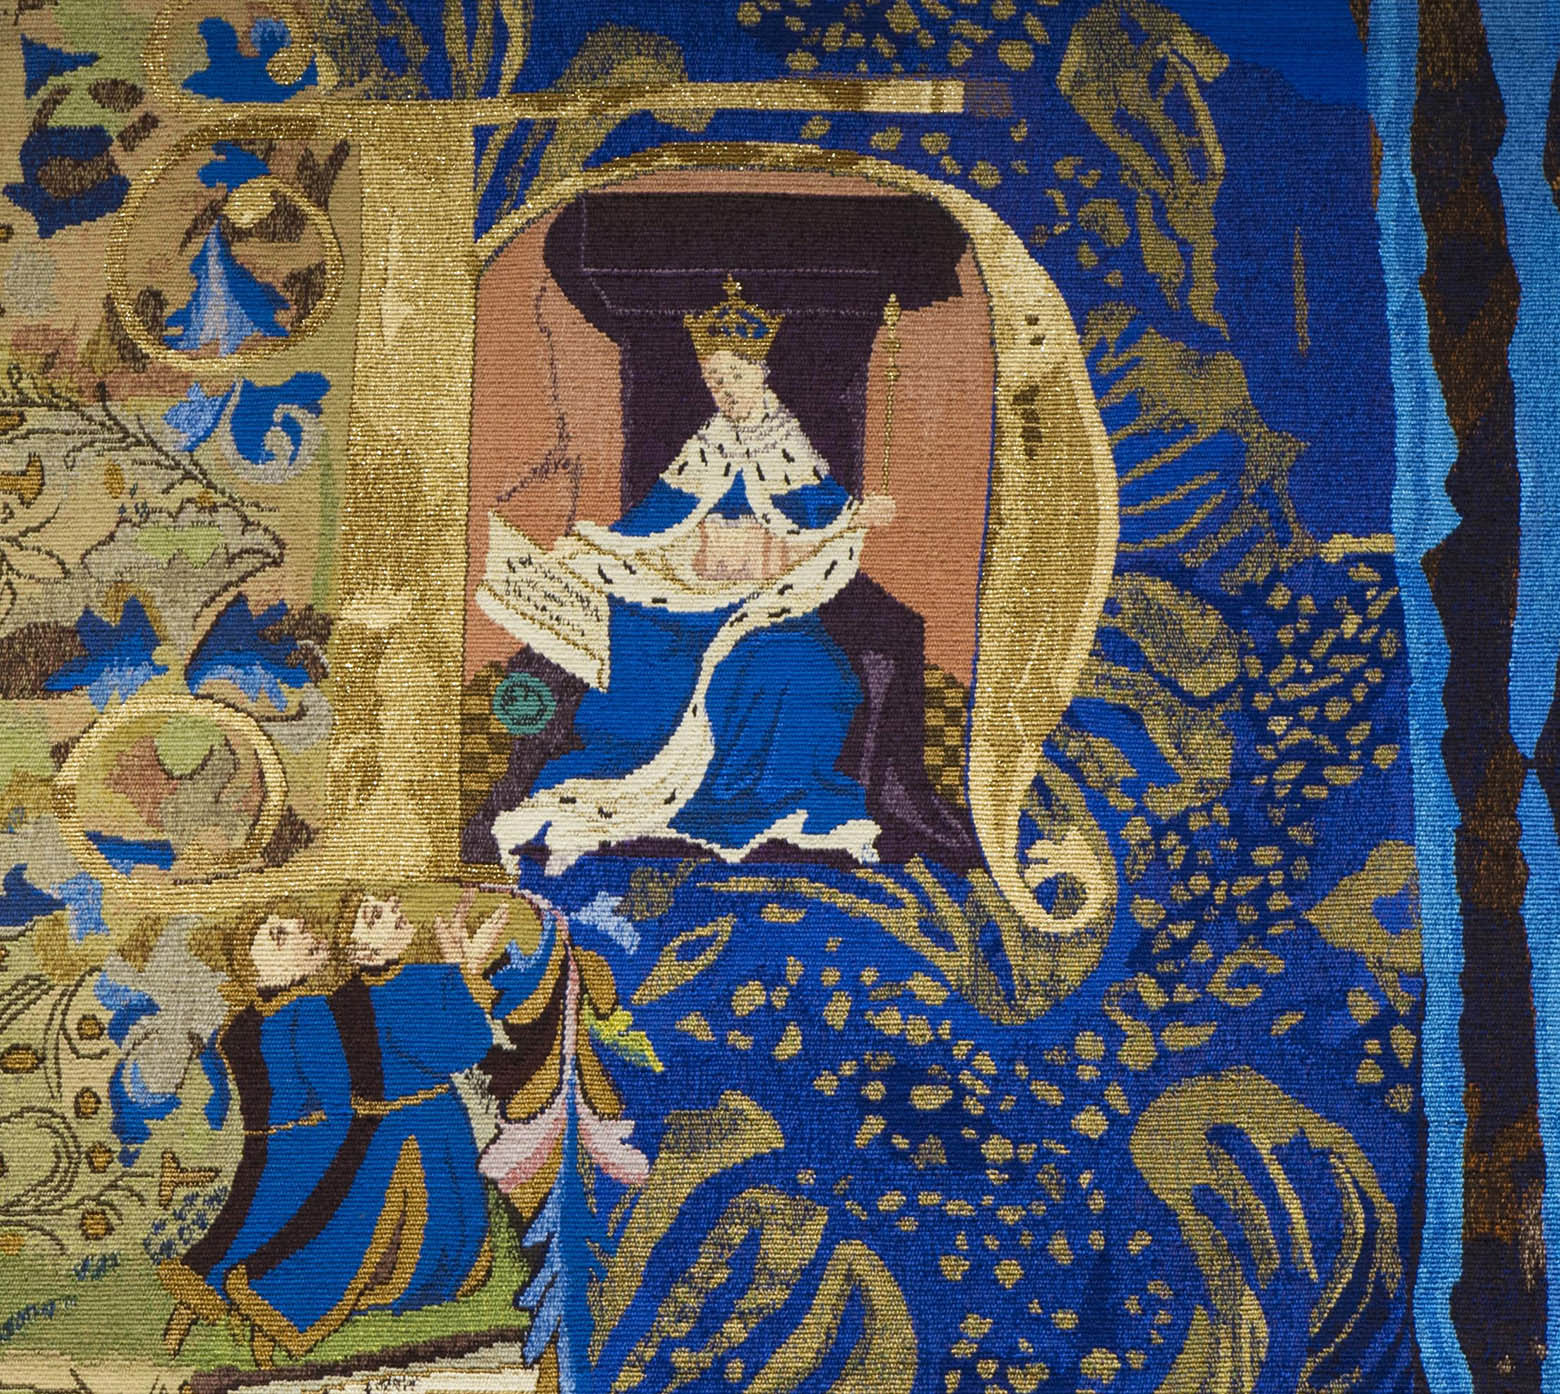 A blue and gold tapestry depicting Henry VI granting rights to liverymen of the Leathersellers